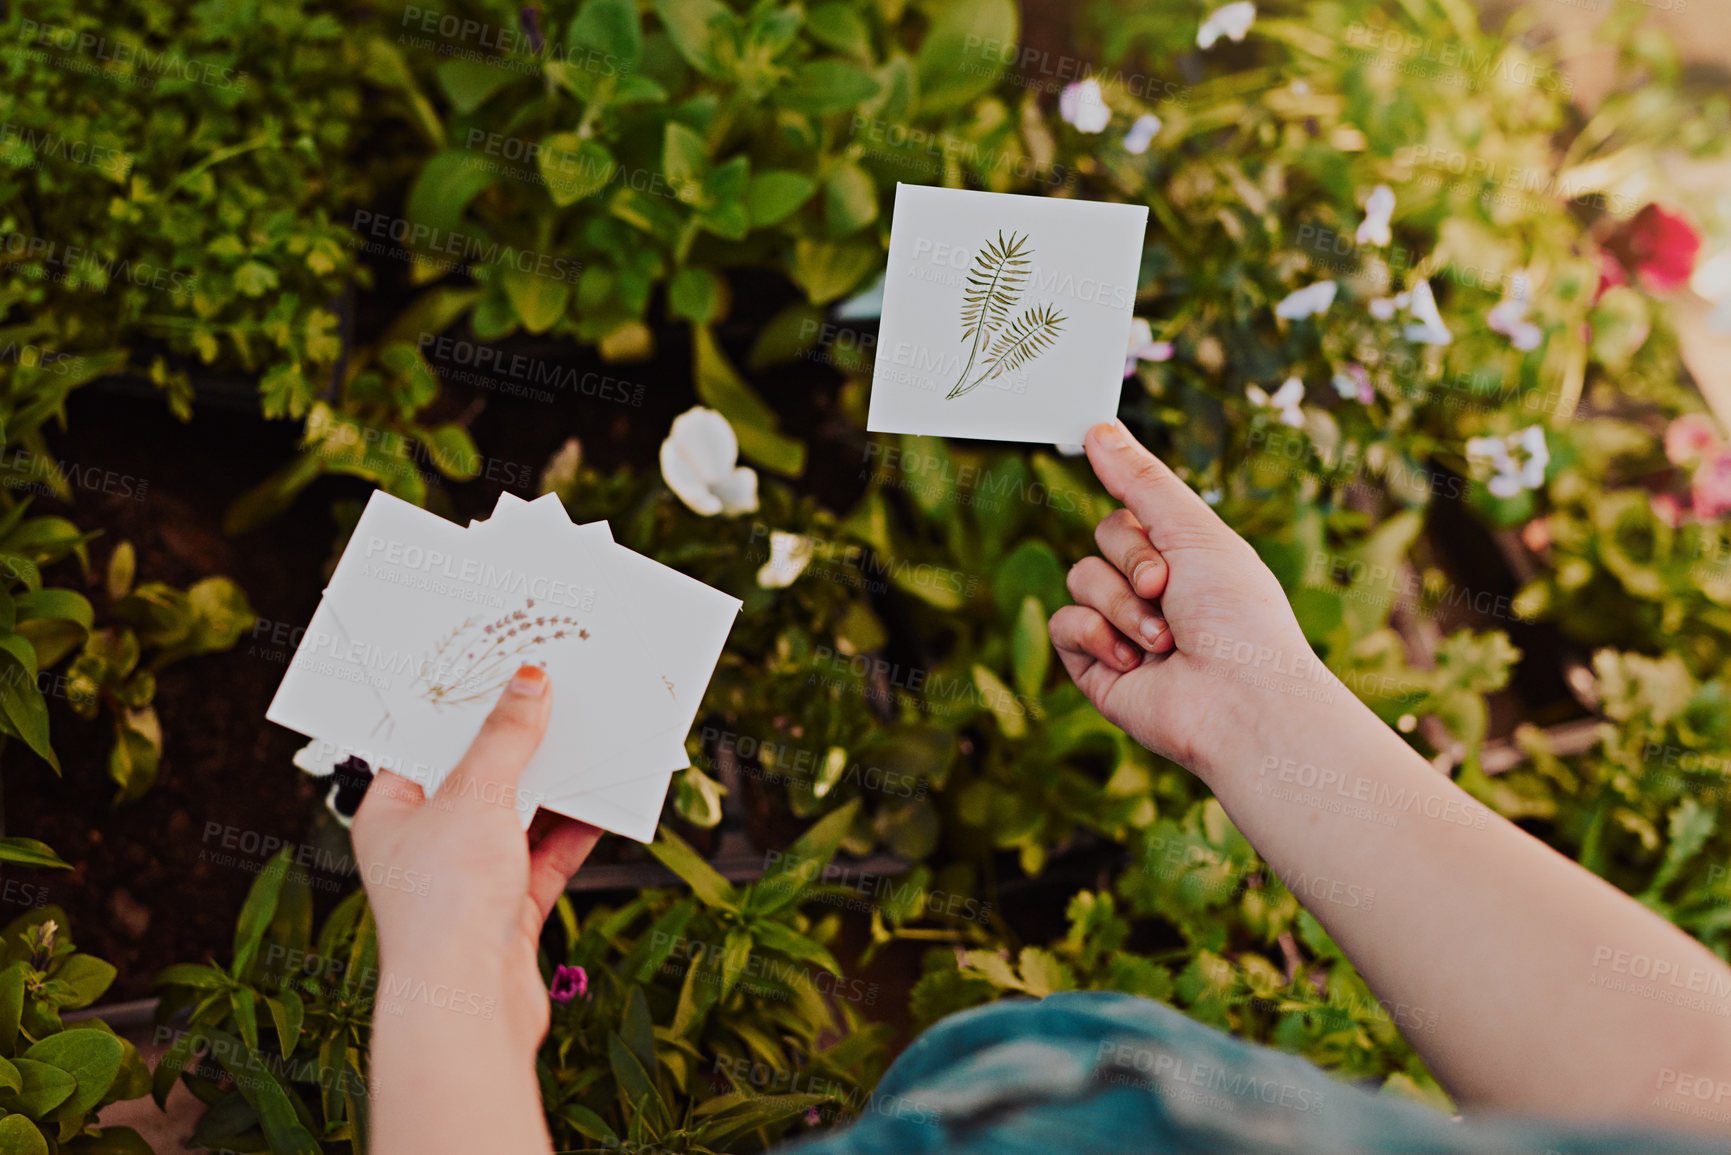 Buy stock photo High angle shot of an unrecognizable young girl holding placards with drawings on them while analyzing plants at home